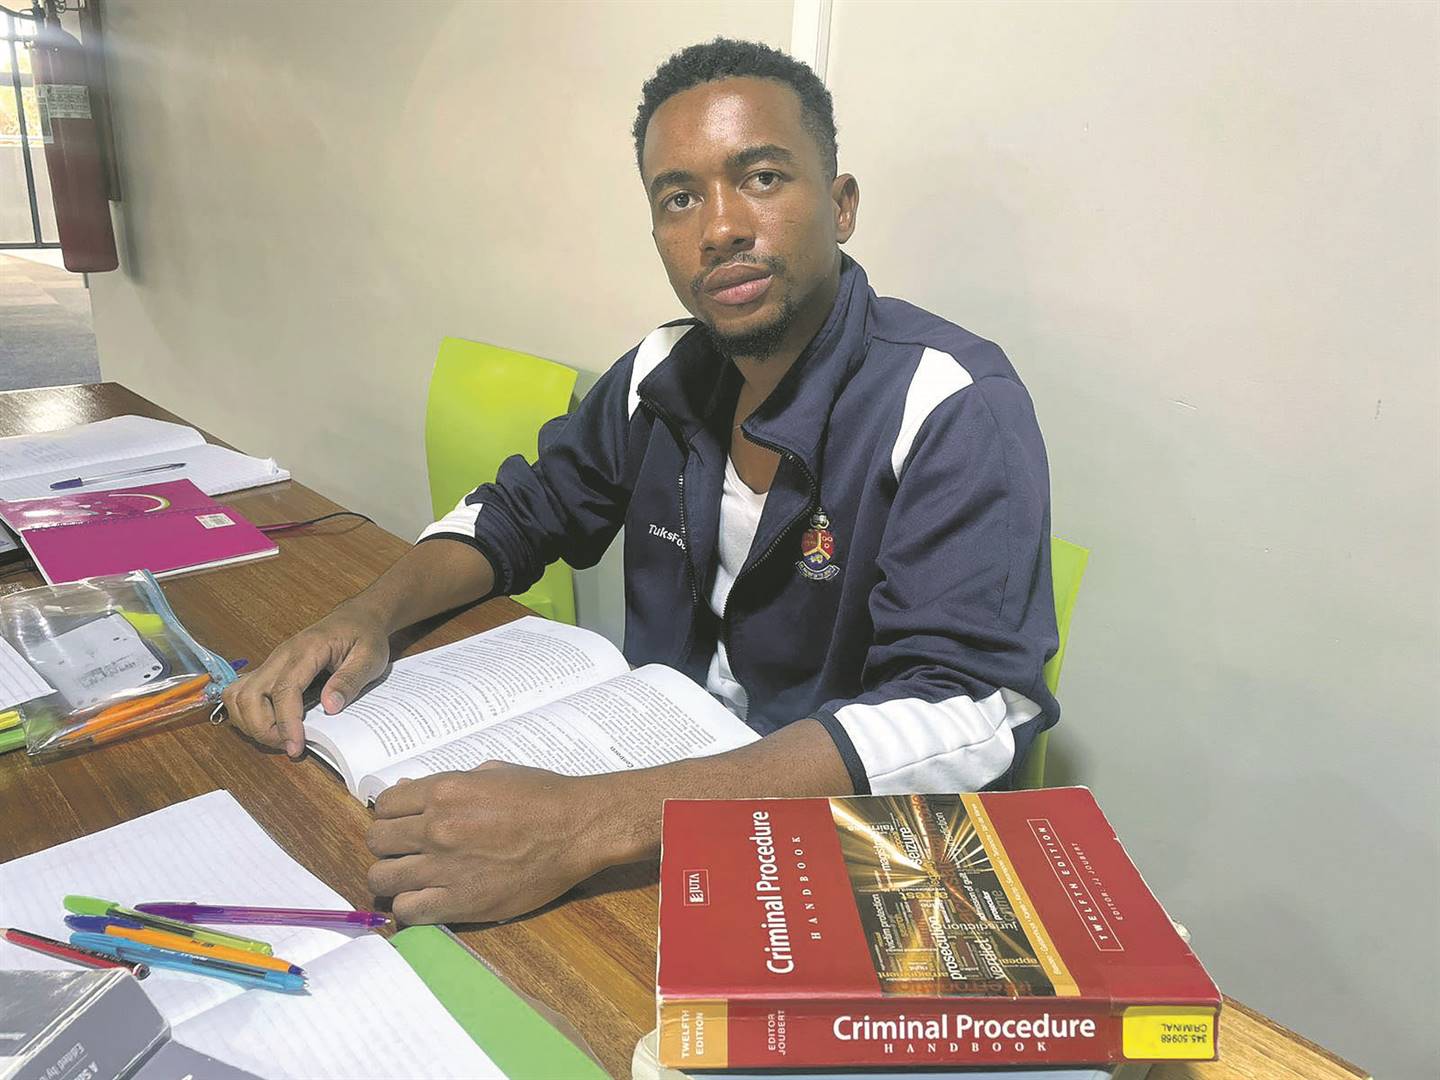 Moses Modisane says he is doing his first year studies in law at the University of Pretoria, and aims to be an advocate that defends those who find themselves on the wrong side of the law.Photo by Kgalalelo Tlhoaele